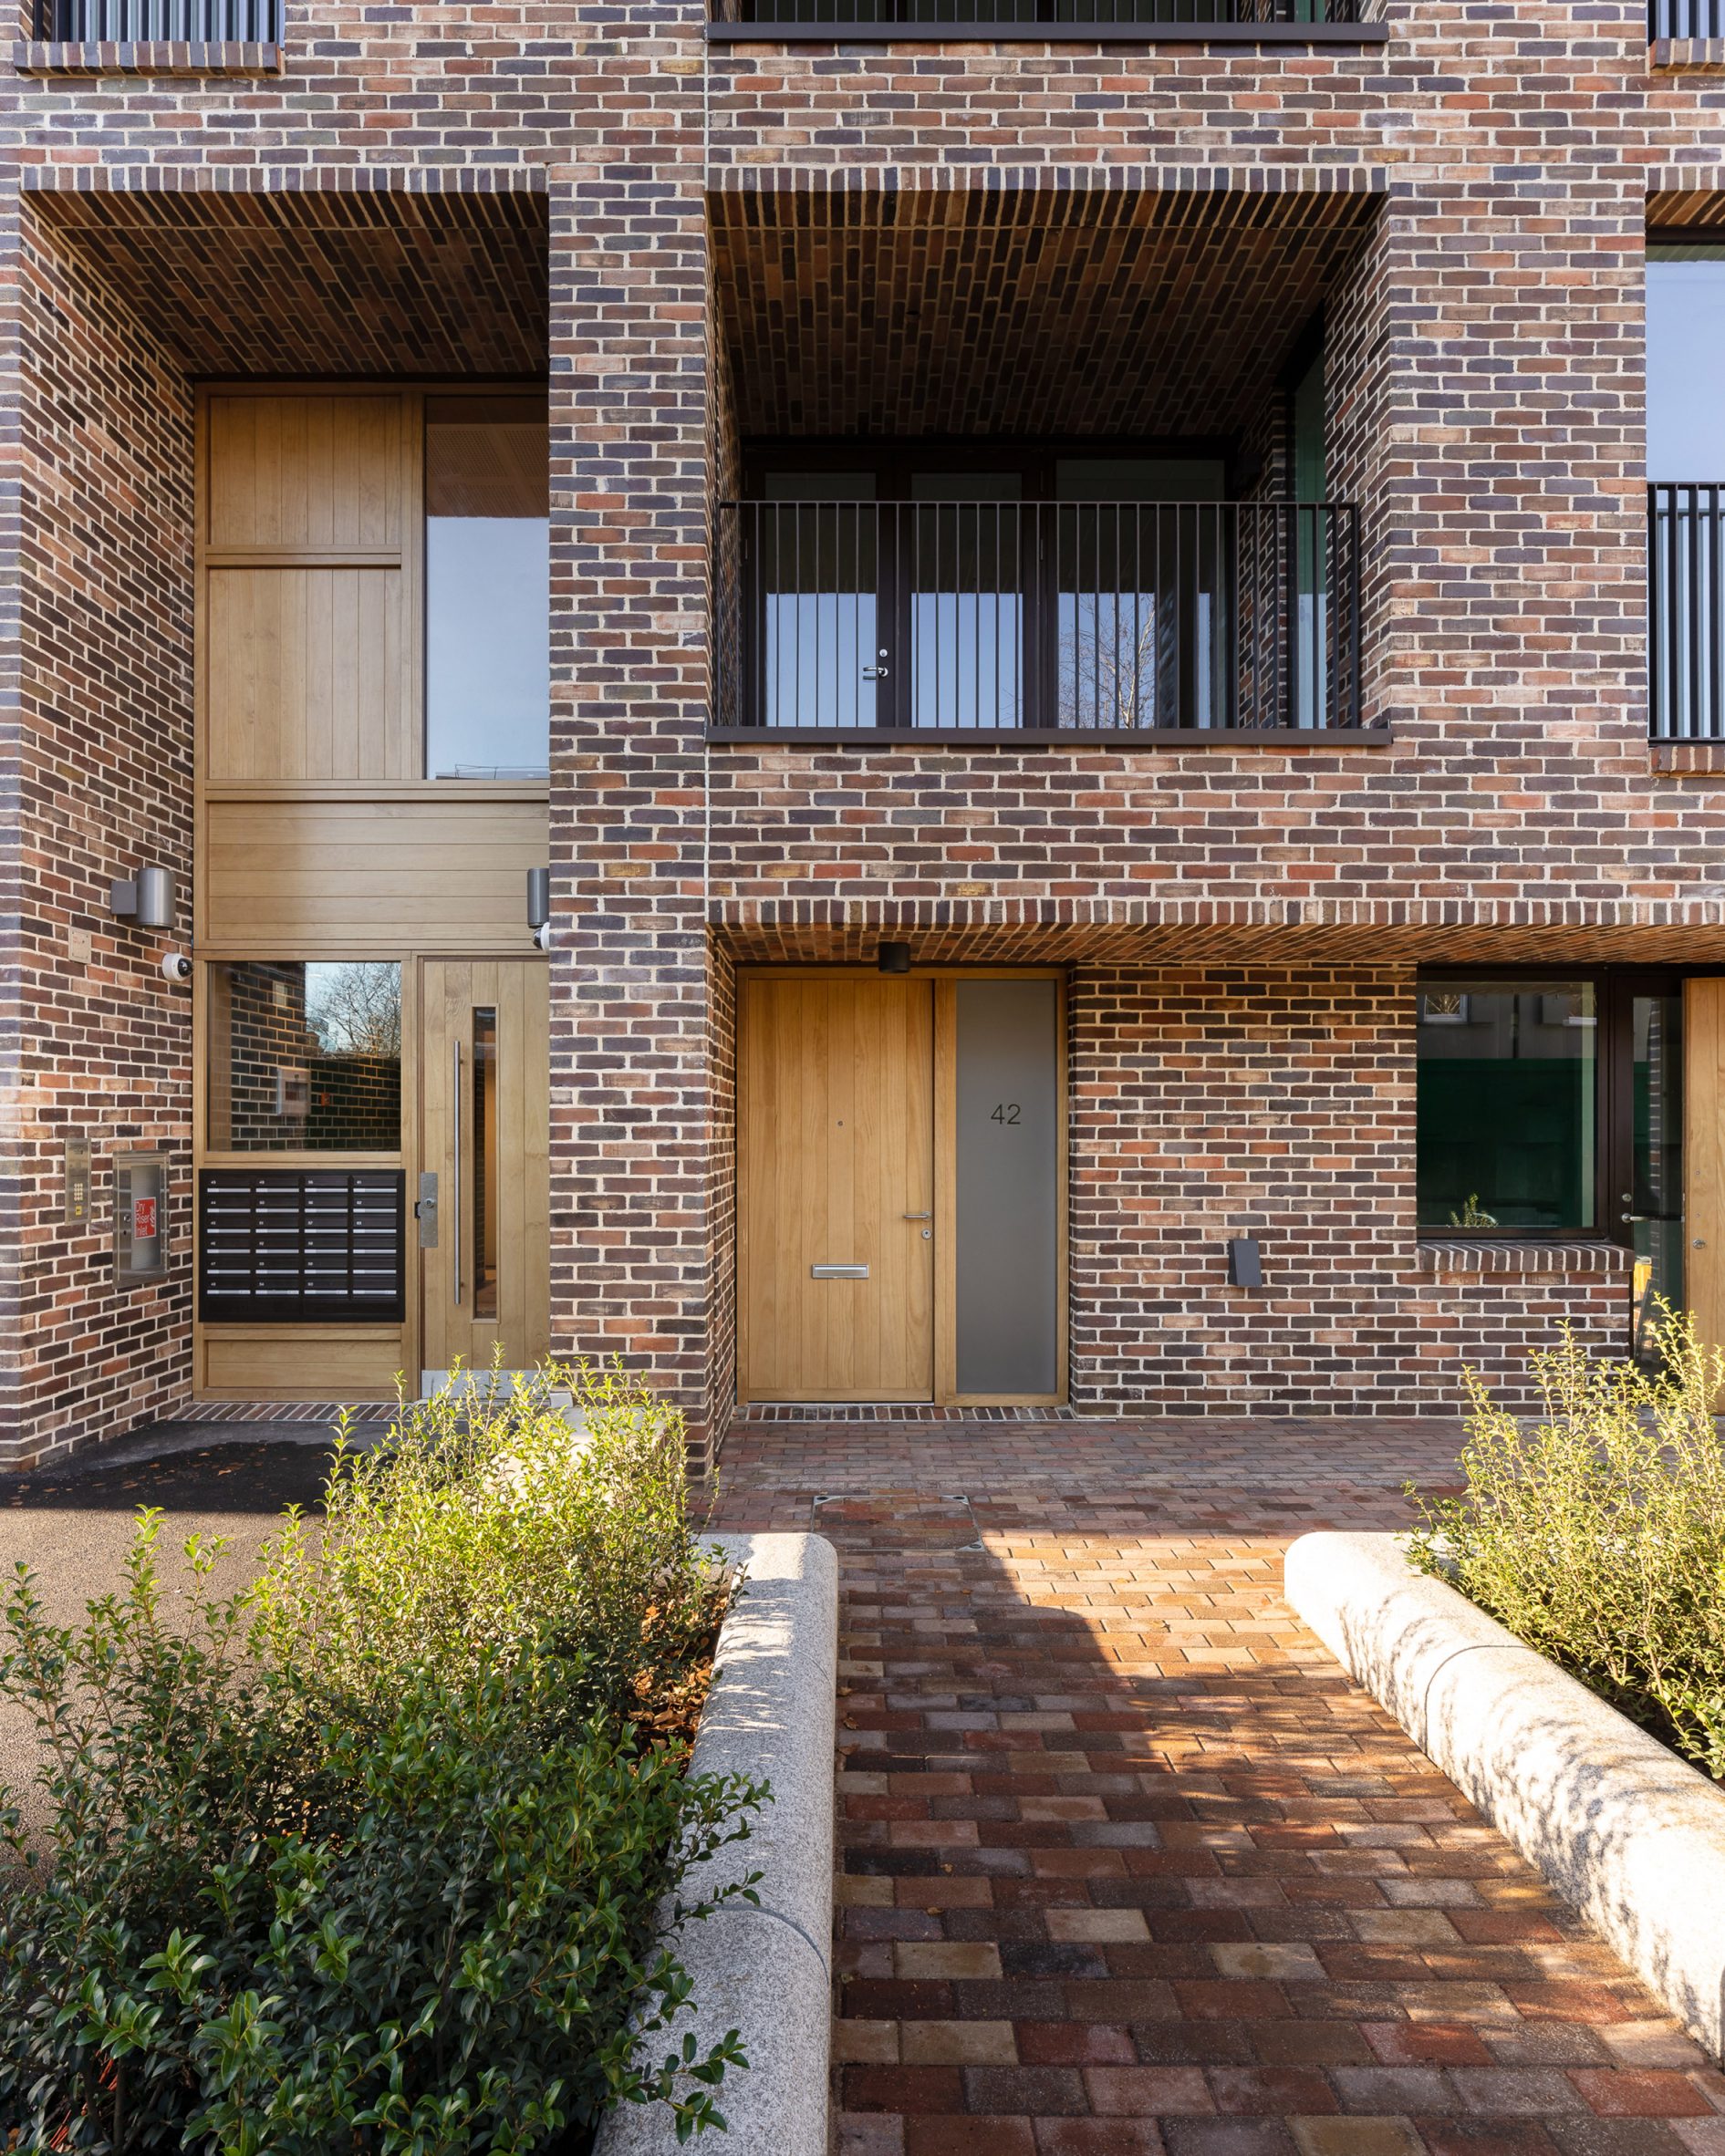 Brick exterior of a residence in Karakusevic Carson Architects' Colville Estate